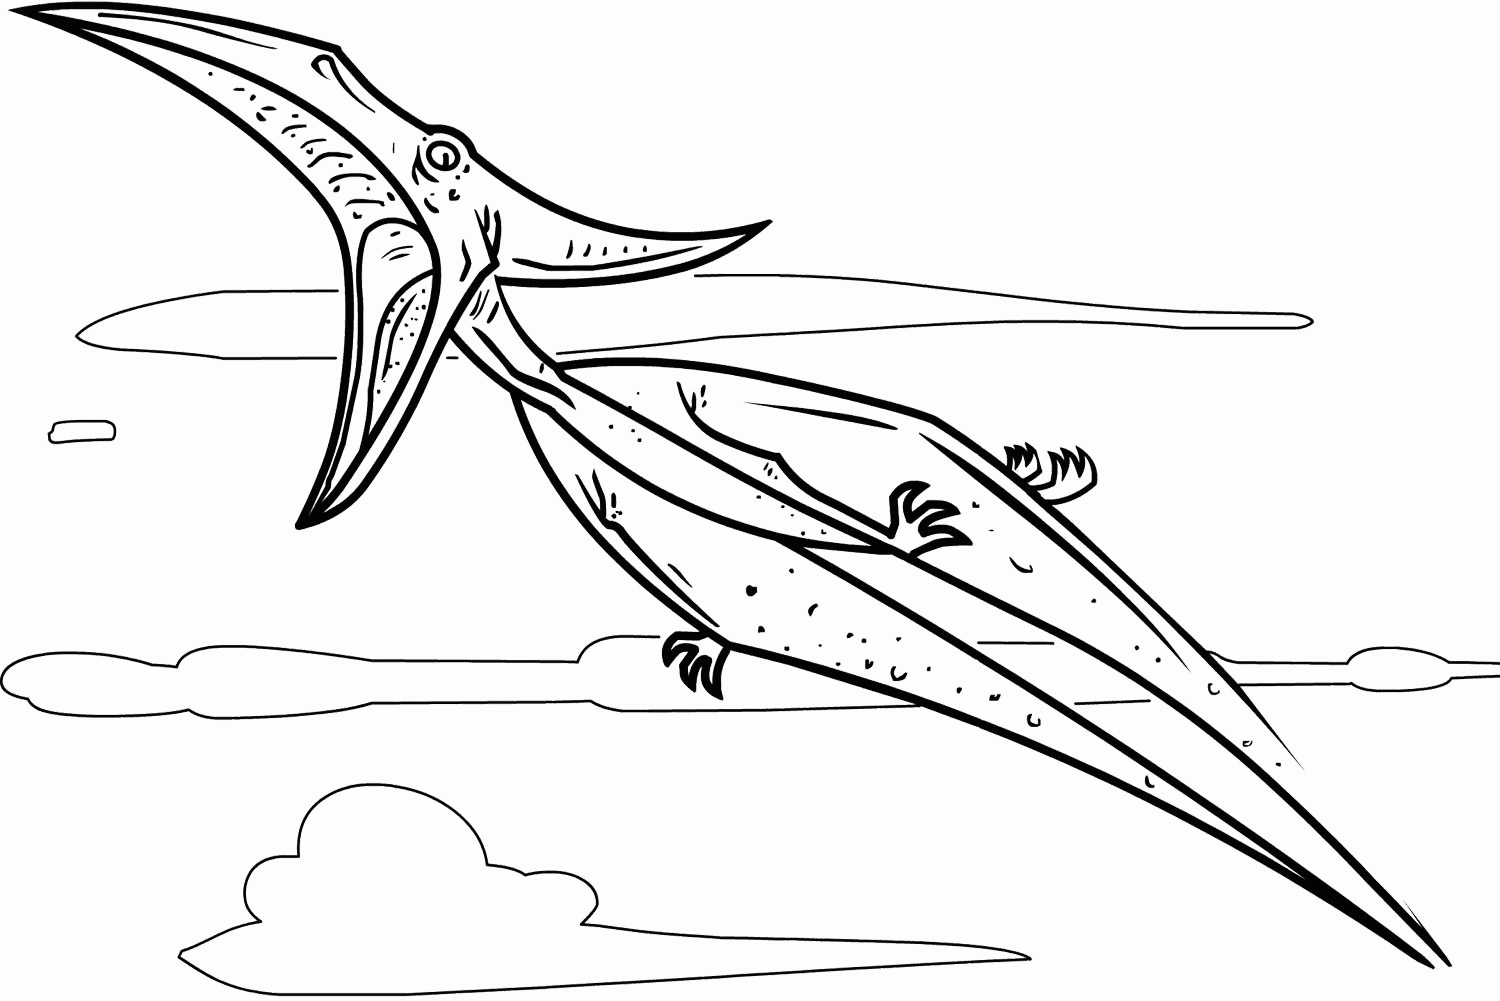 Pterodactyl Coloring Pages | Dinosaurs Pictures and Facts